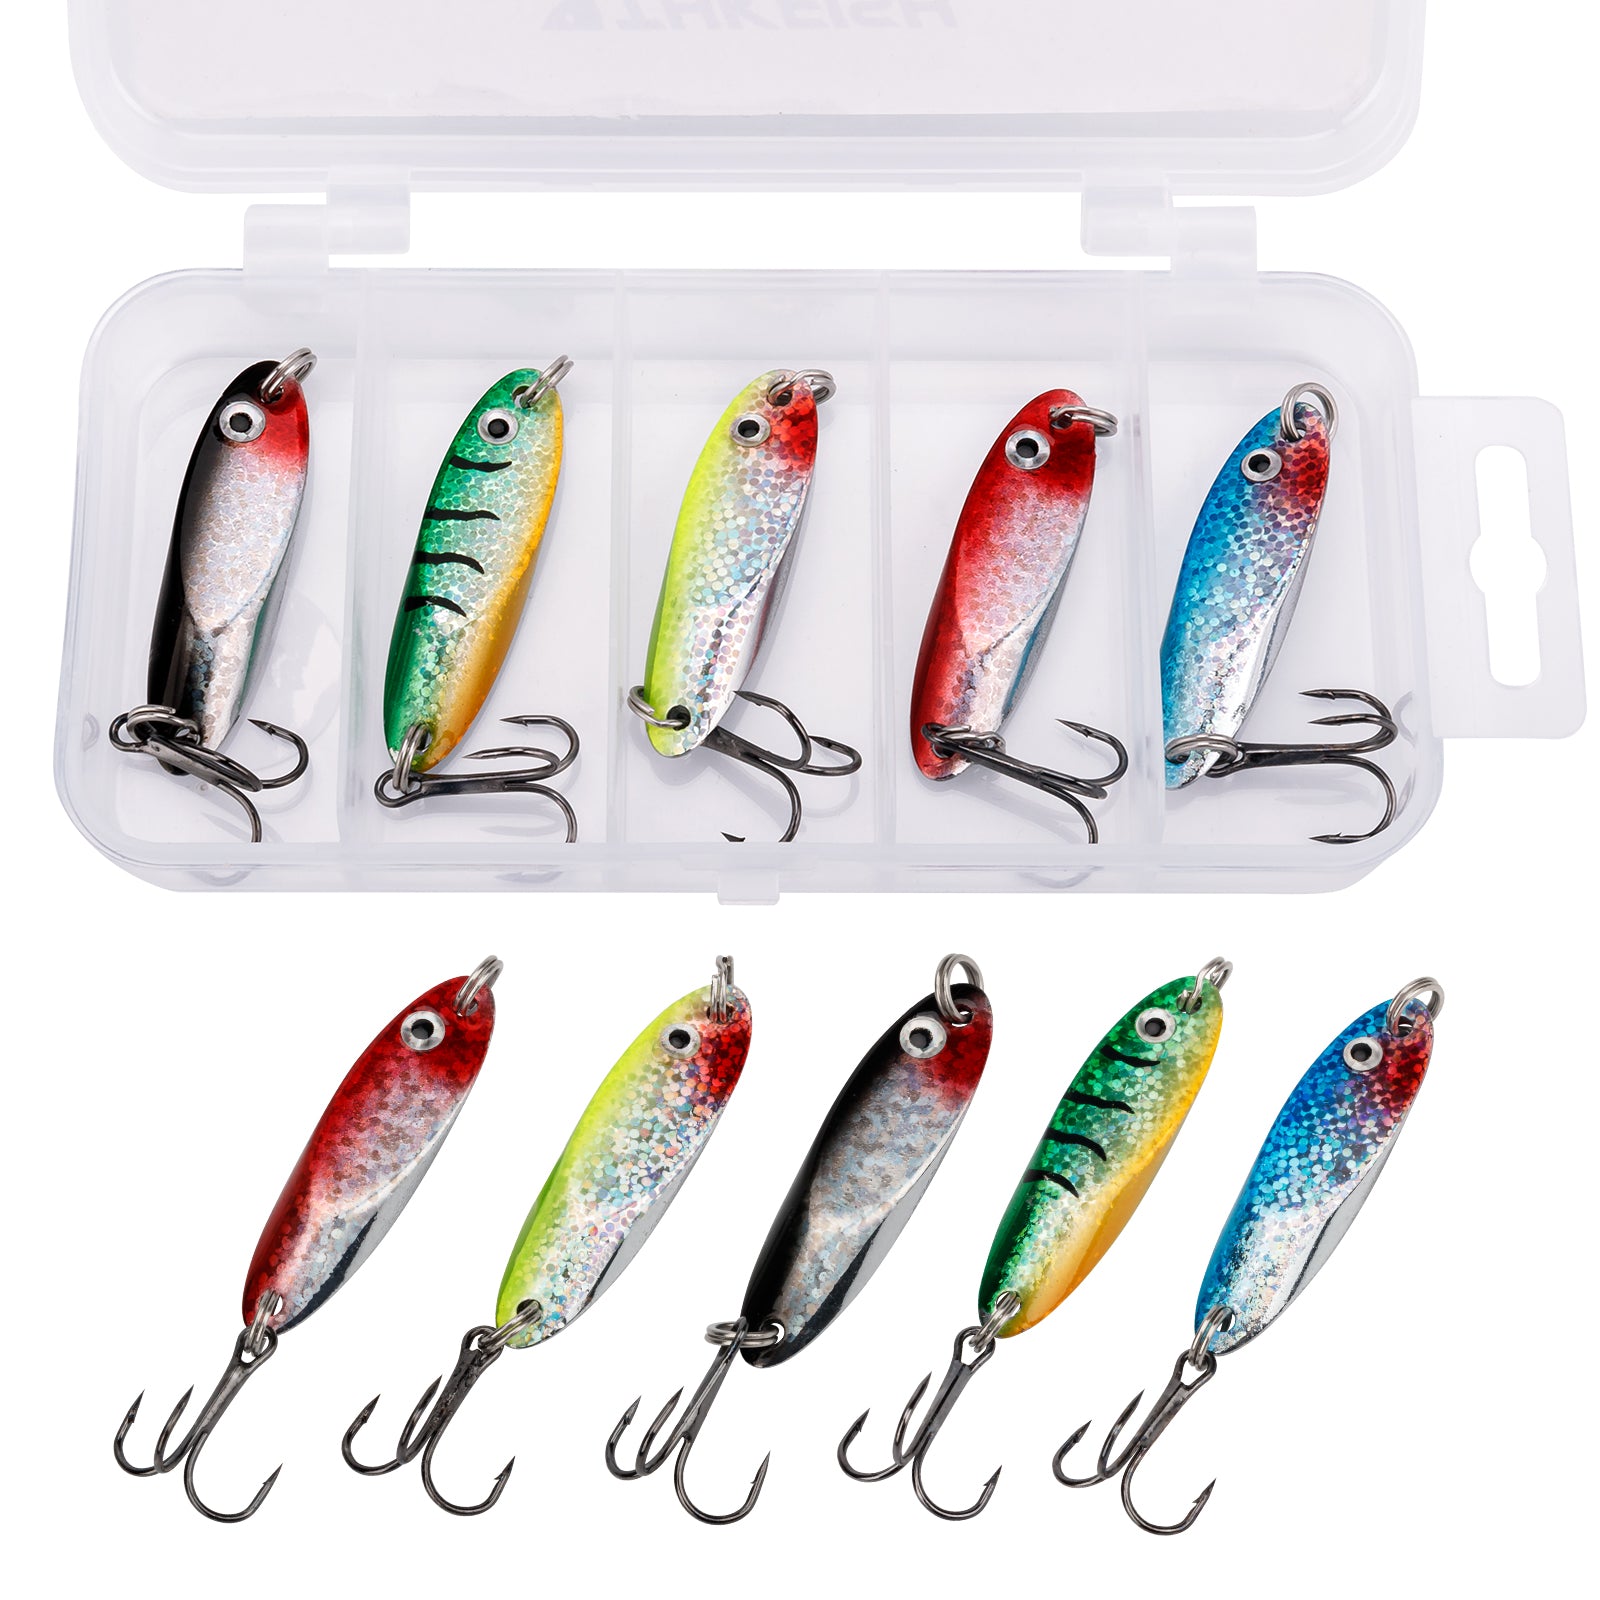 THKFISH Saltwater Trout Fishing Spoons Lures for Bass - 5pcs